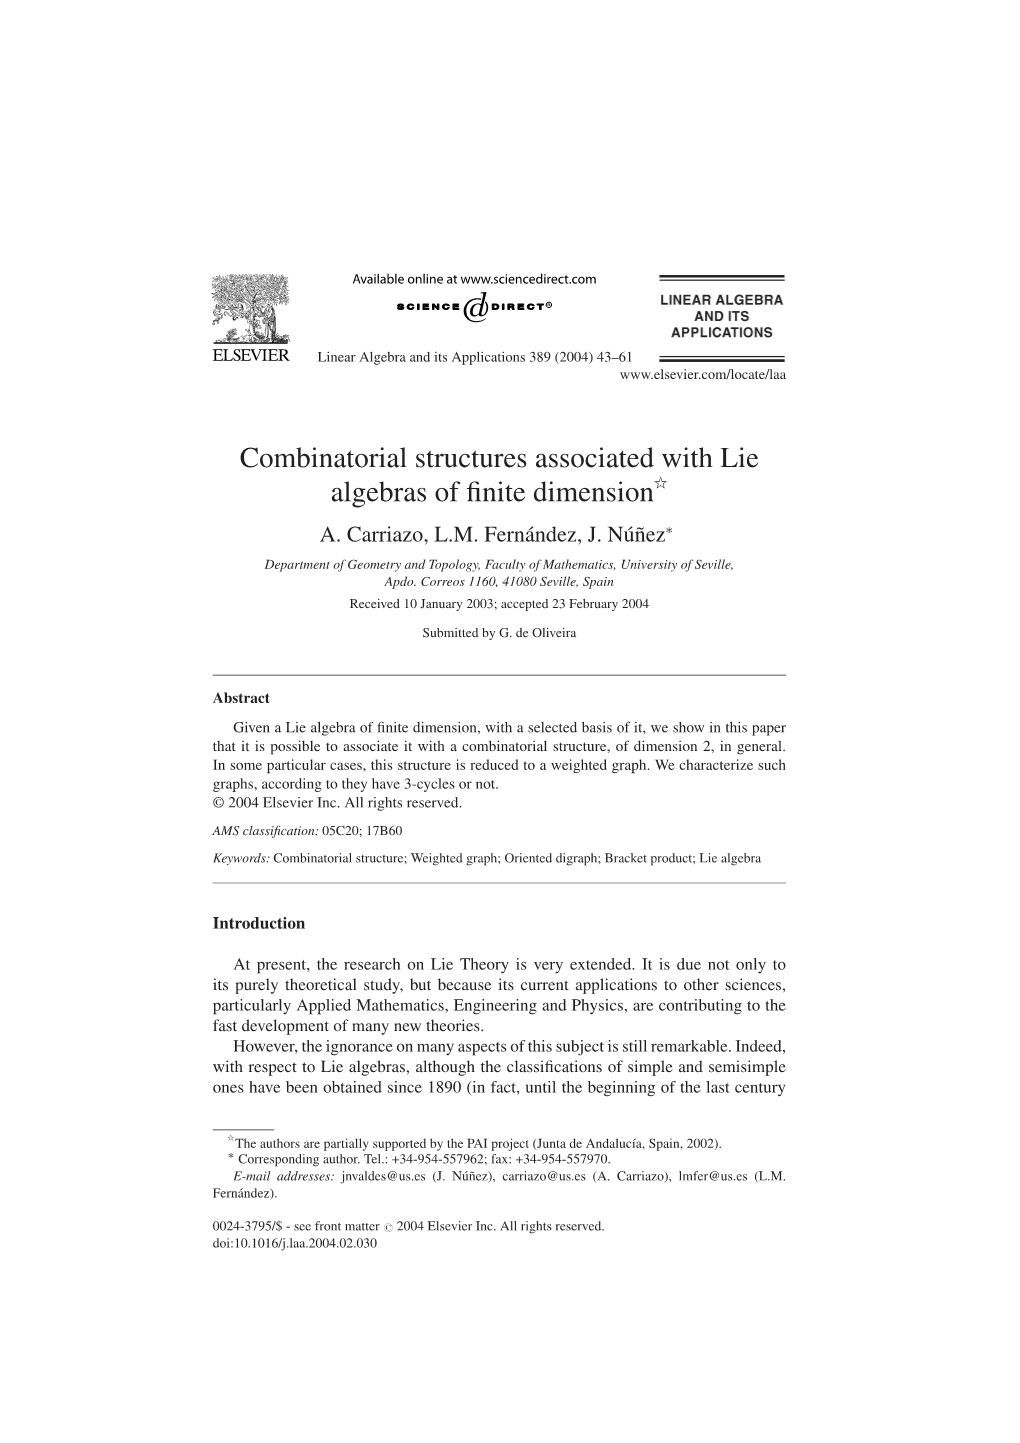 Combinatorial Structures Associated with Lie Algebras of Finite Dimension